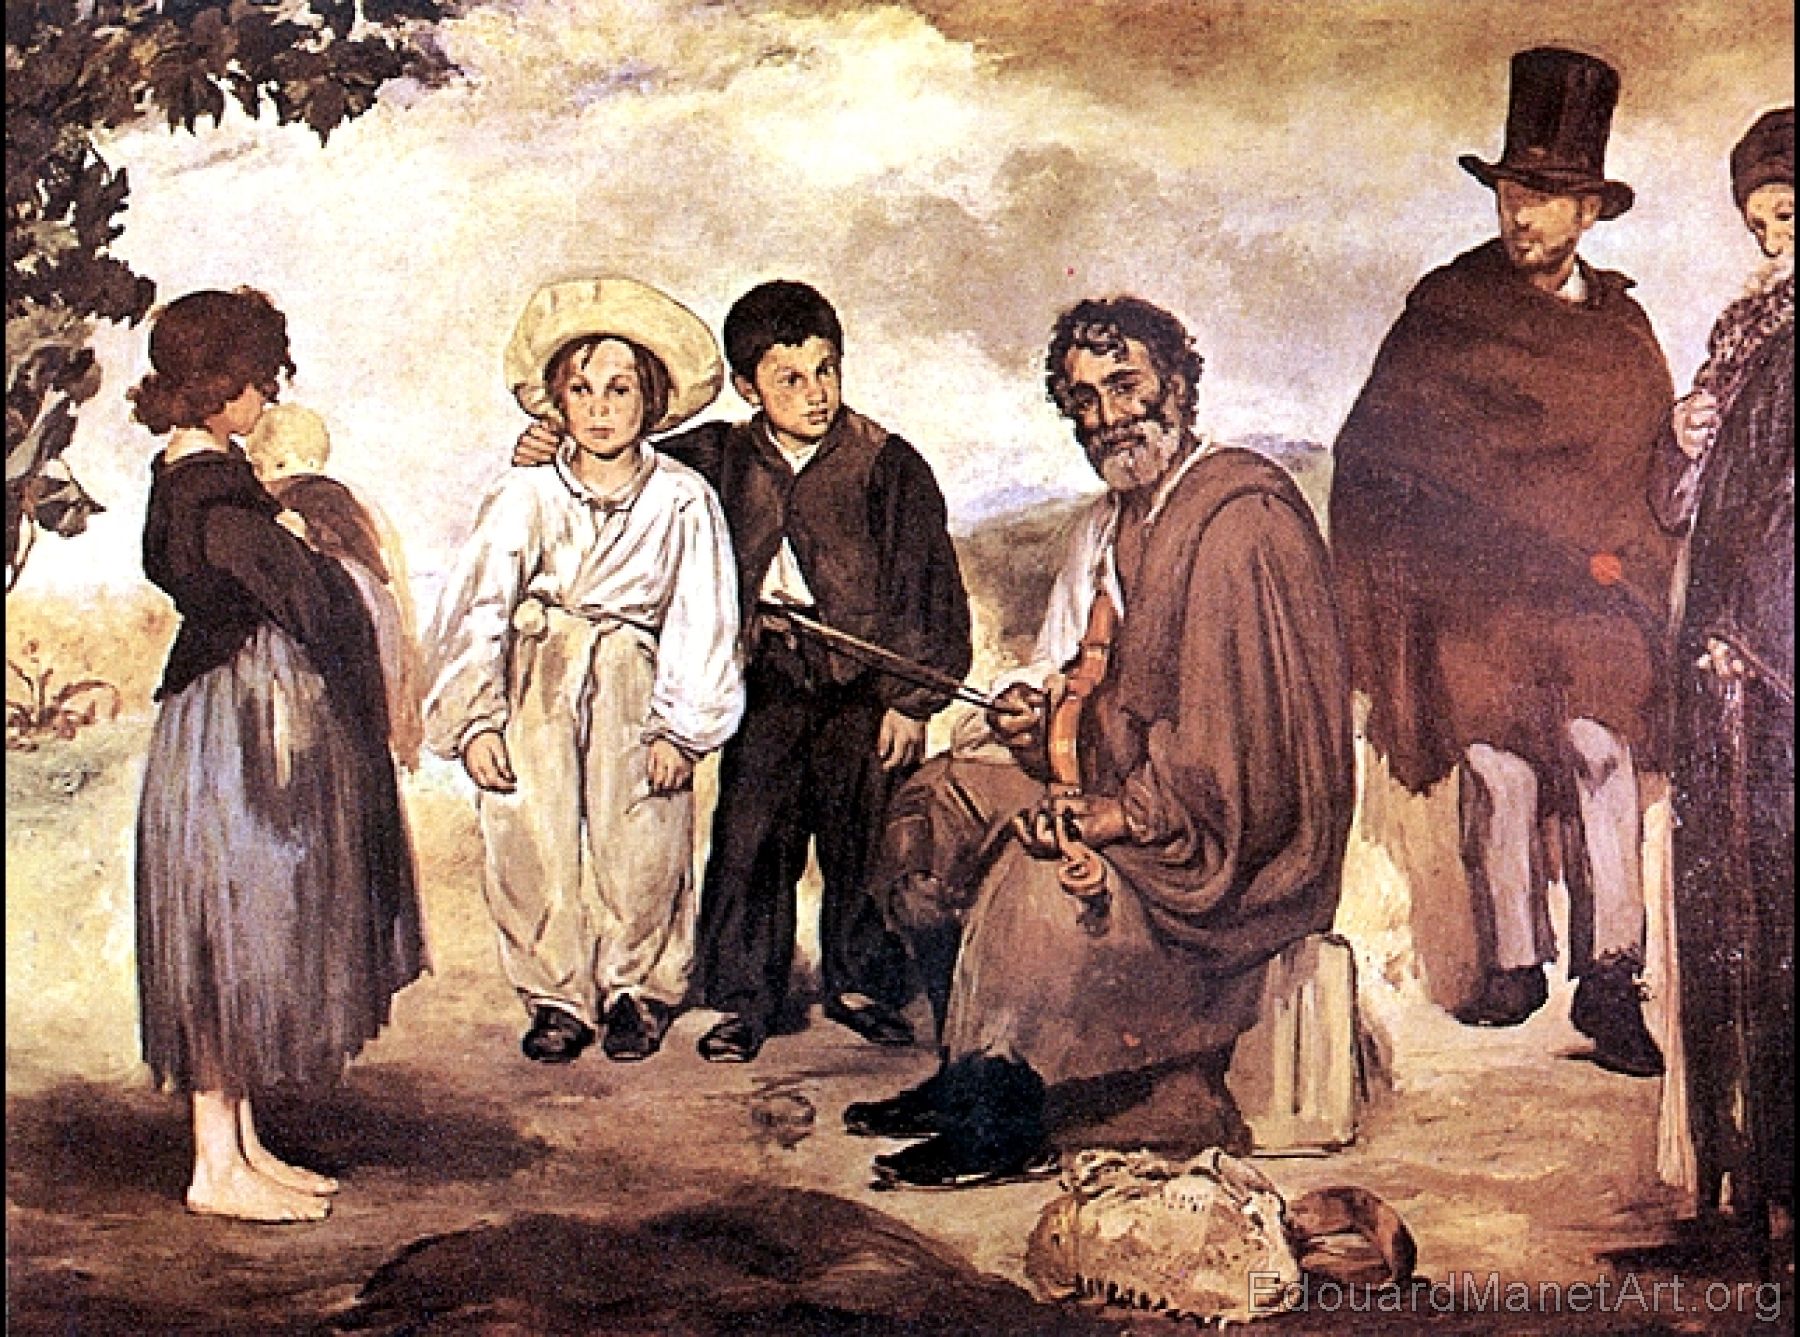 The old musician